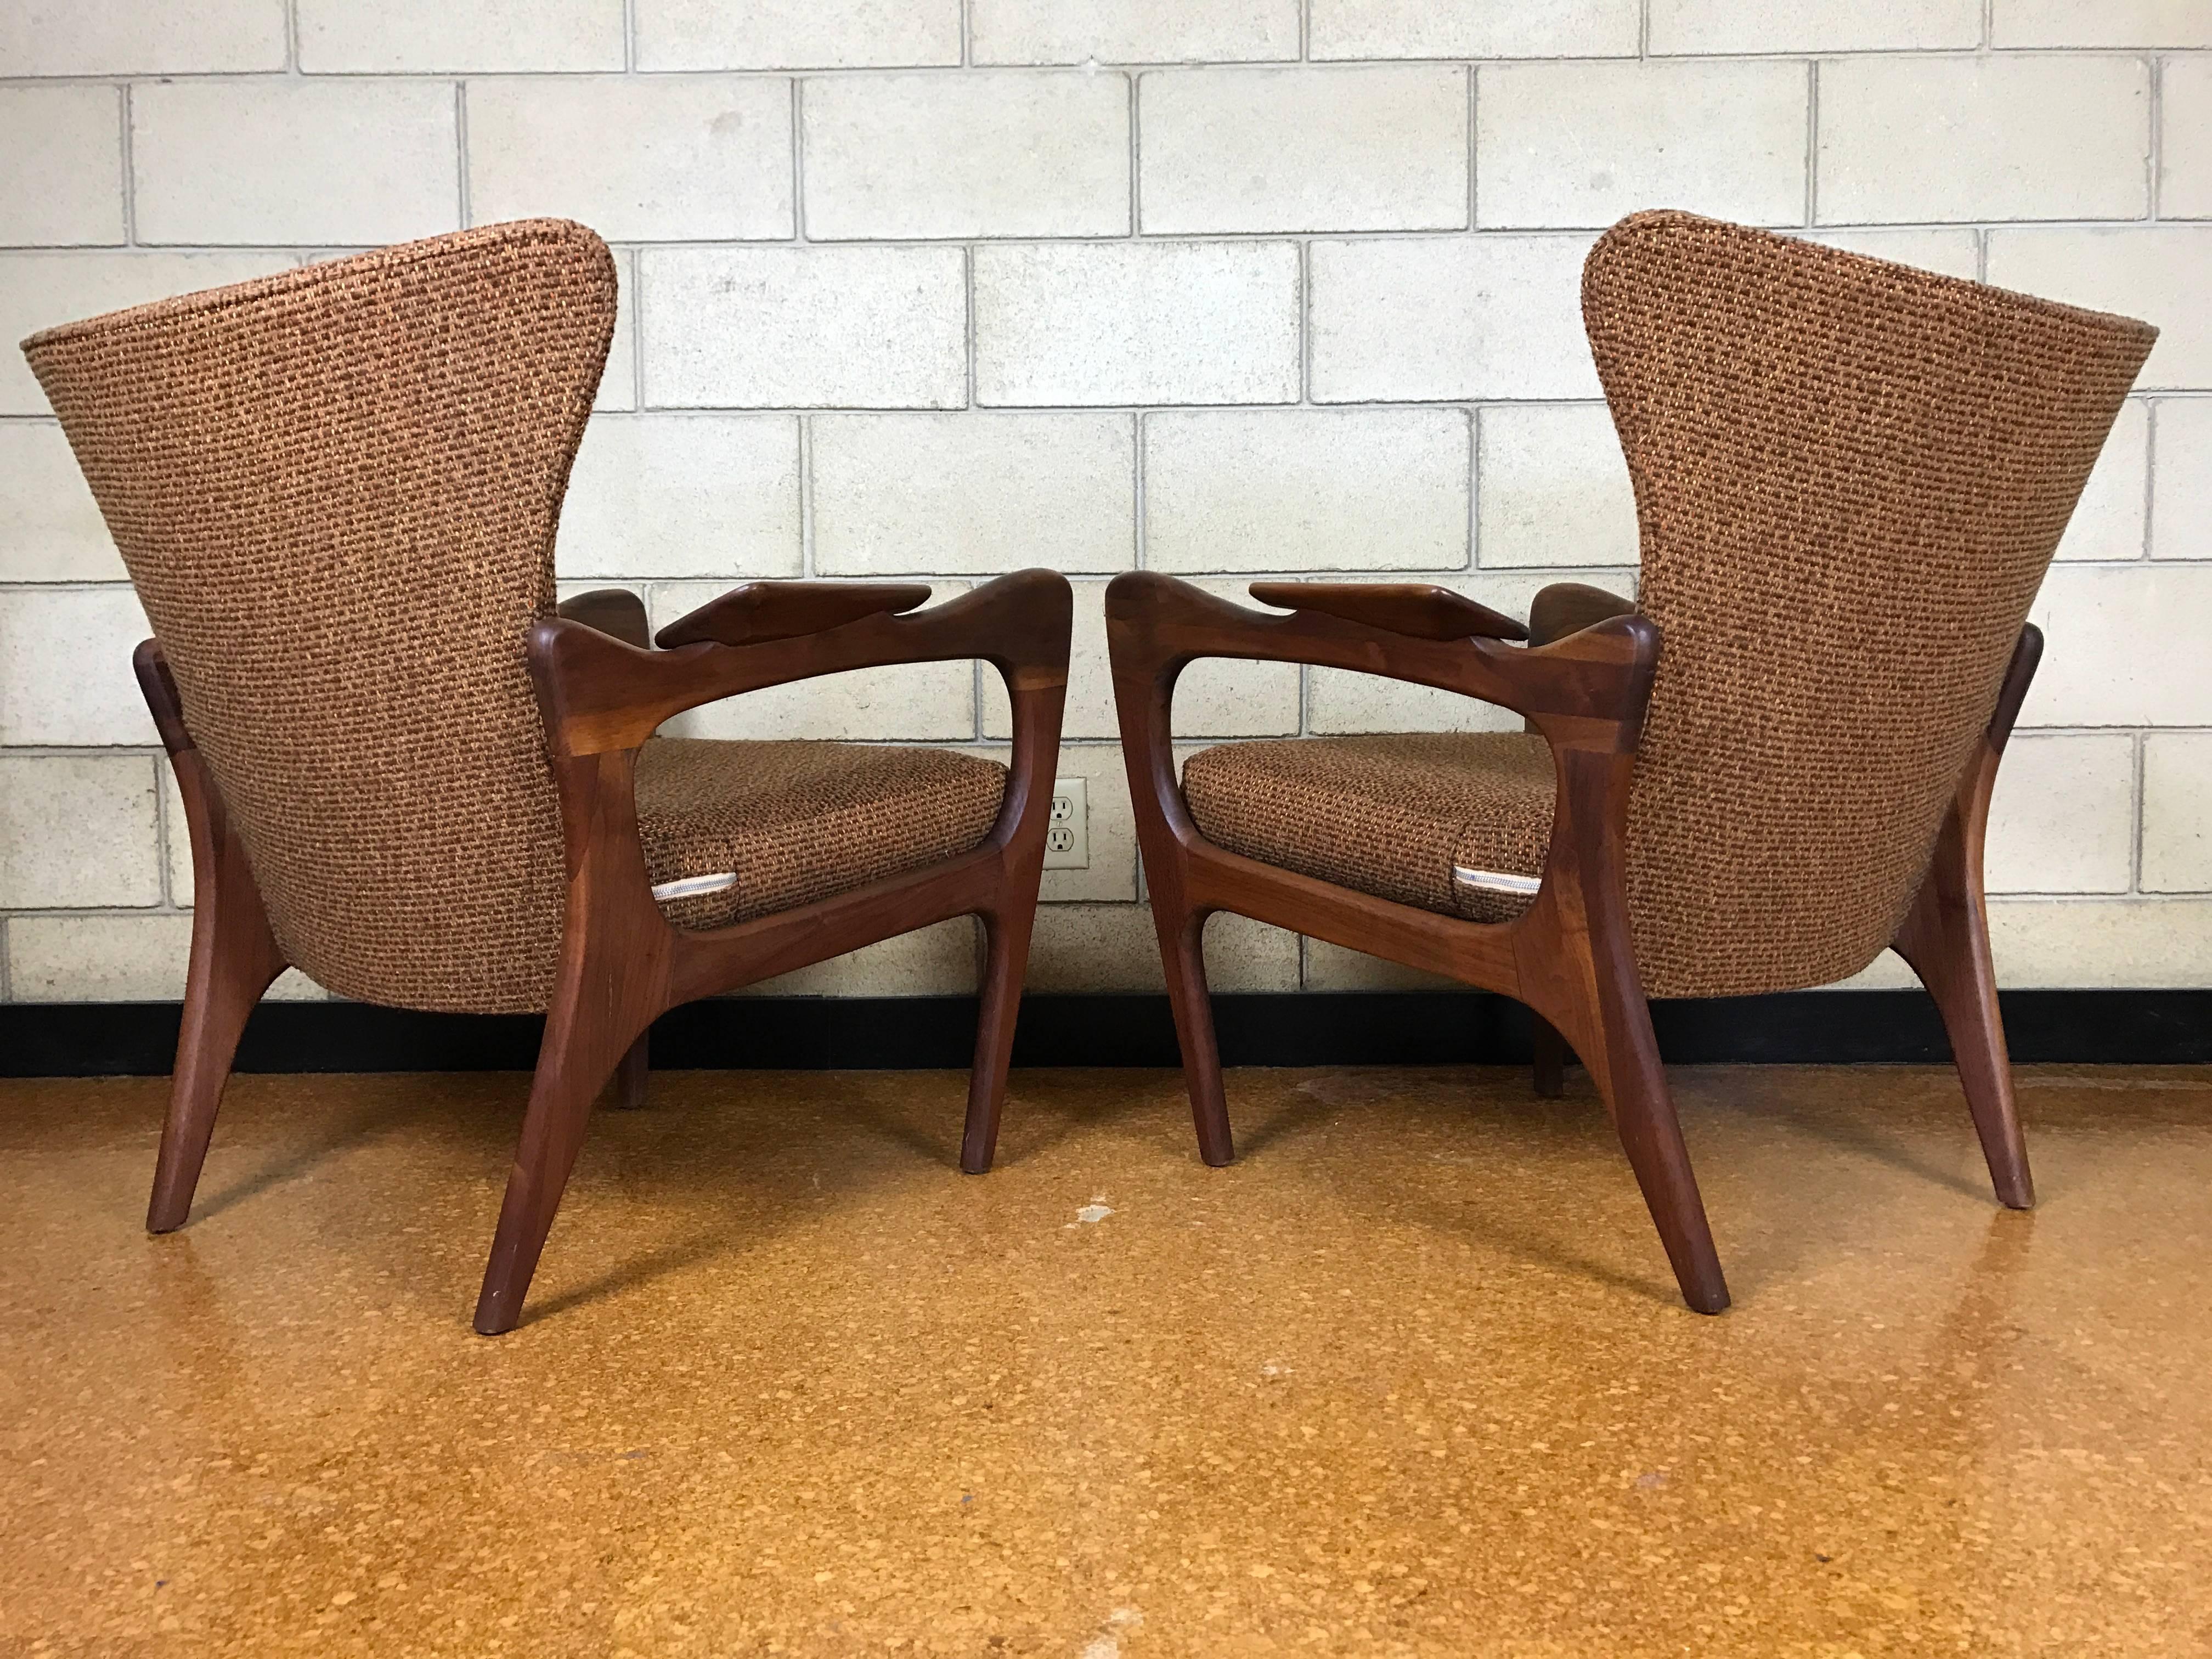 American Pair of Sculptural Wingback Lounge Chairs by Adrian Pearsall, Craft Associates